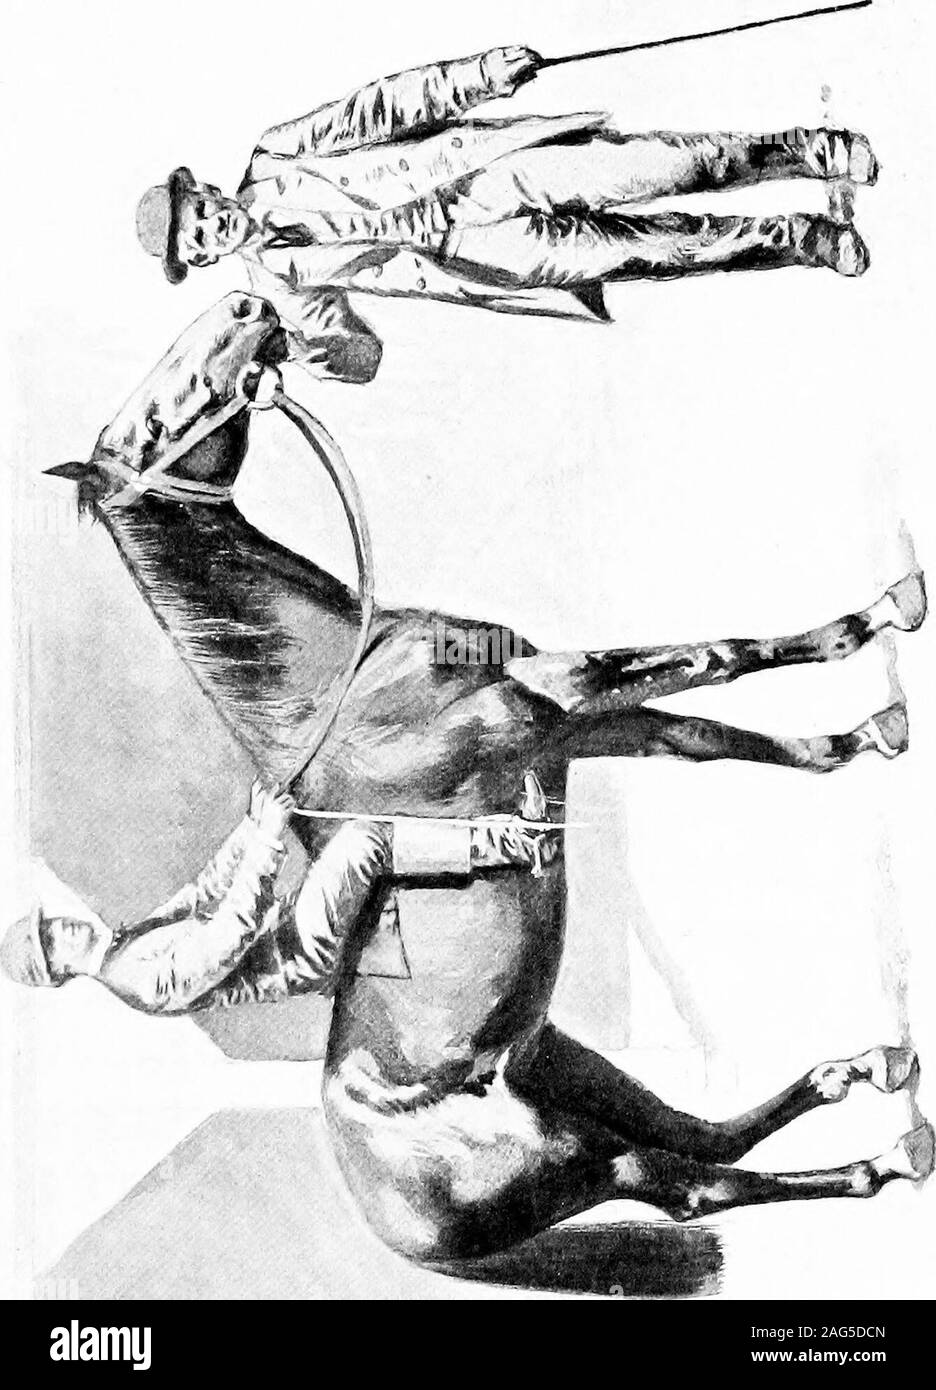 . The horse in America; a practical treatise on the various types common in the United States, with something of their history and varying characteristics. il War the breeding of Thor-oughbreds was severely interrupted, as in Ken-tucky and the South generally there were sternerthings to be done. Besides, the armies were al-ways looking for horses without any prejudicesagainst Thoroughbreds, and the guerrilla bandshad an absolute fondness for them. It did notcease, but languished. Immediately afterwards itstarted again, there being many new importa-tions from England, and in 1866 Jerome Parkwas Stock Photo